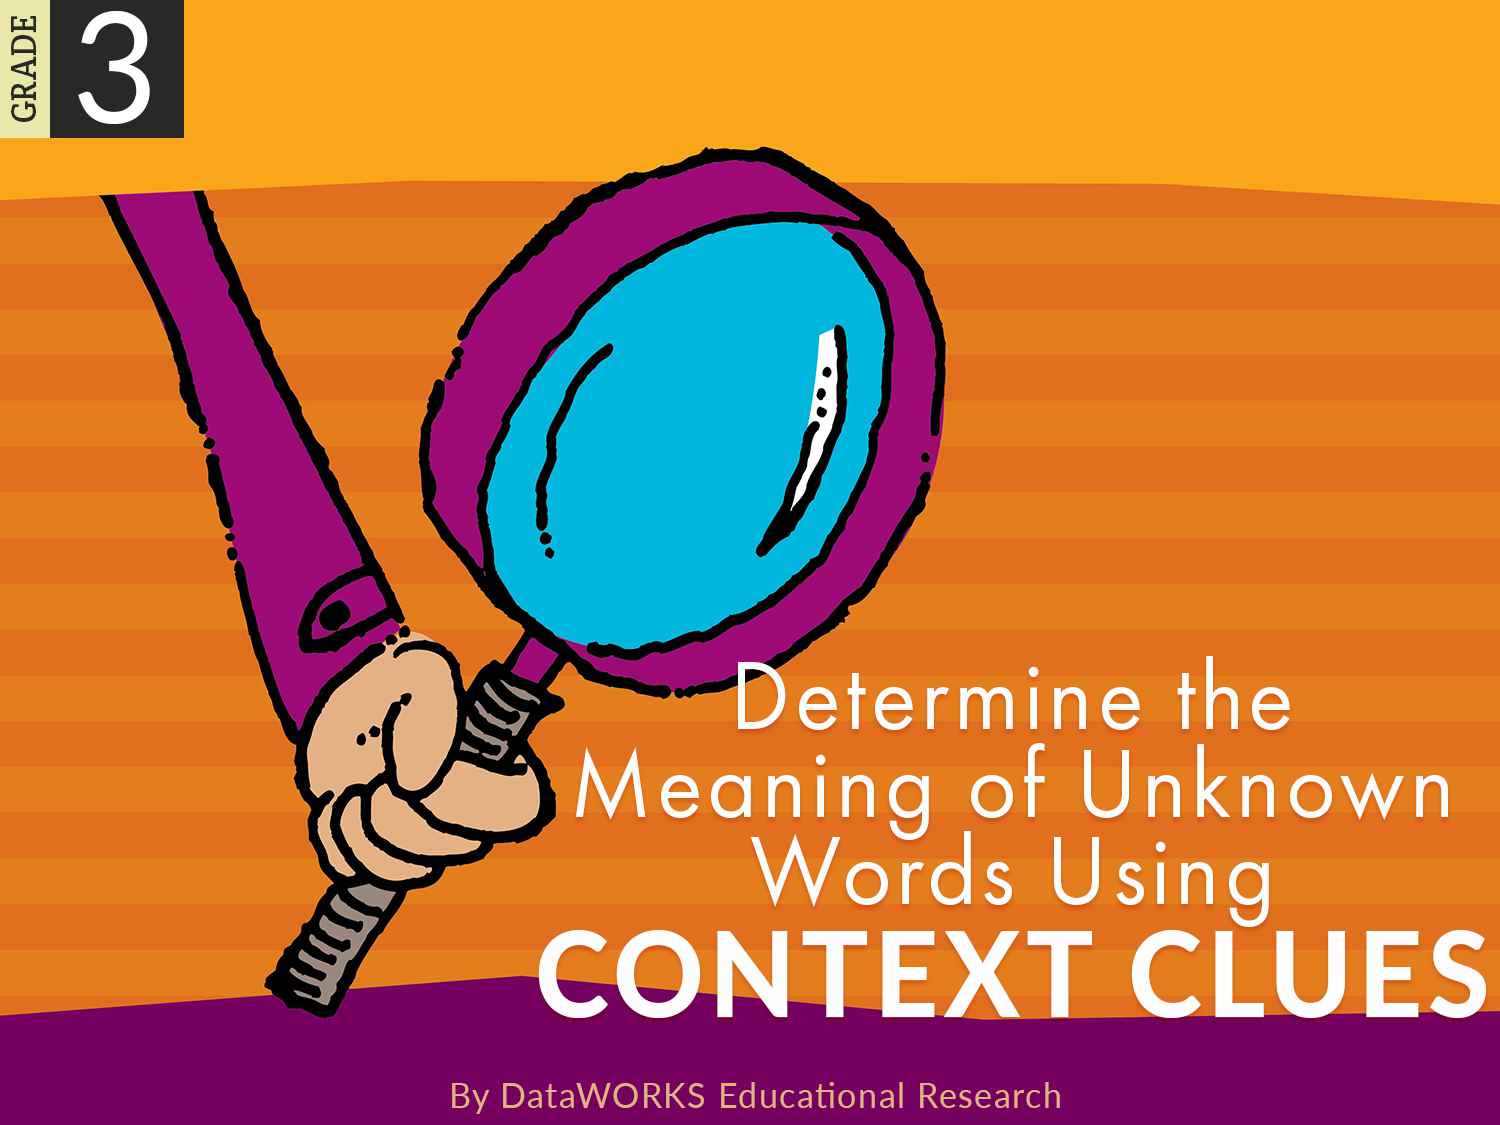 Determine the Meaning of Words Using Context Clues | Lesson Plans